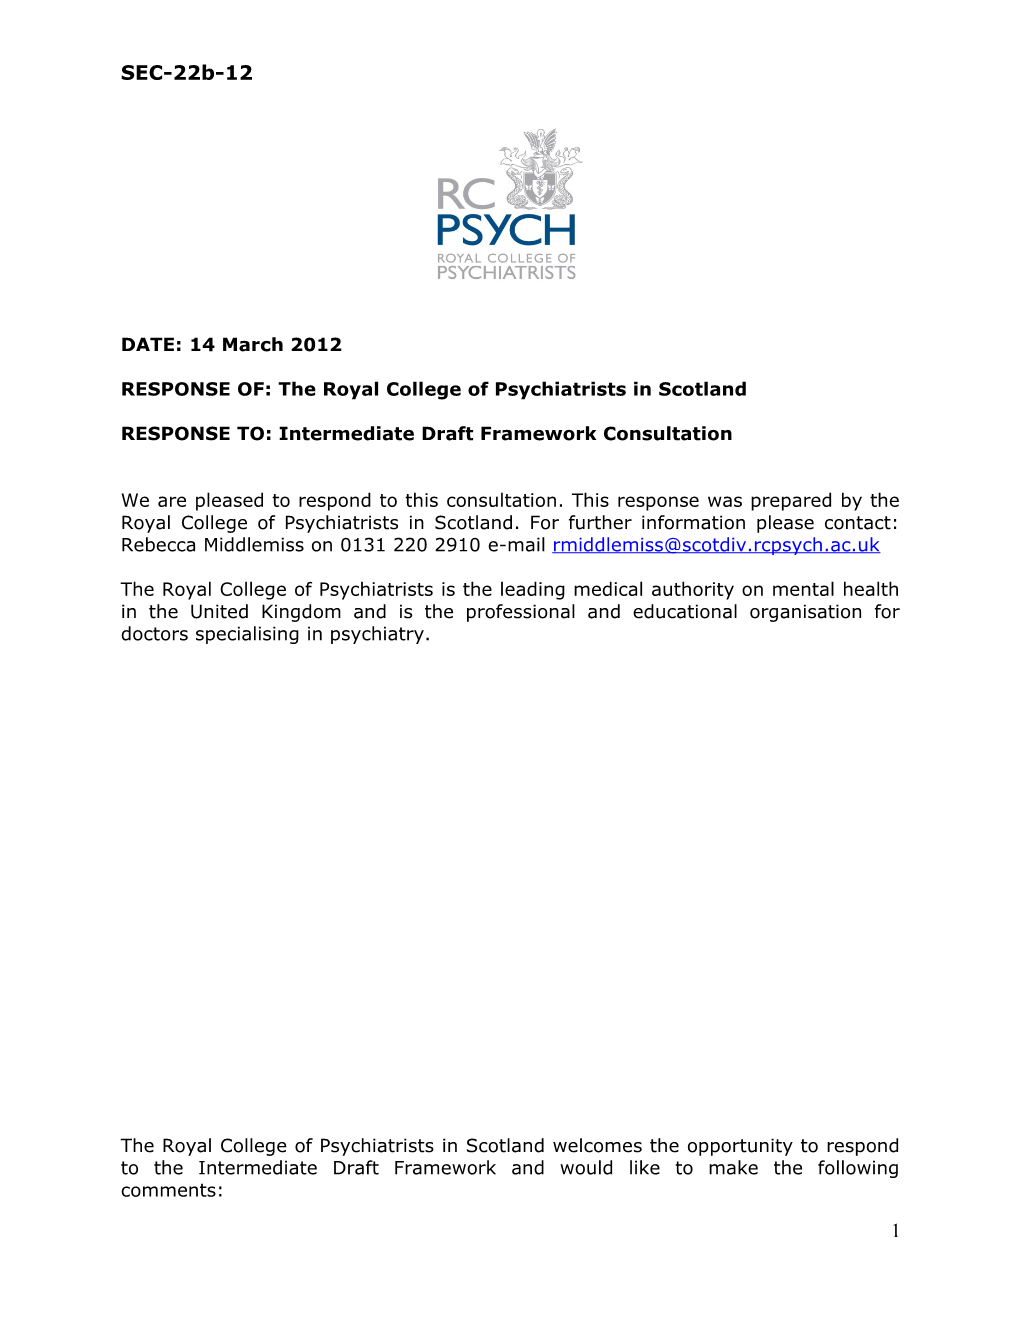 RESPONSE OF:The Royal College of Psychiatrists in Scotland